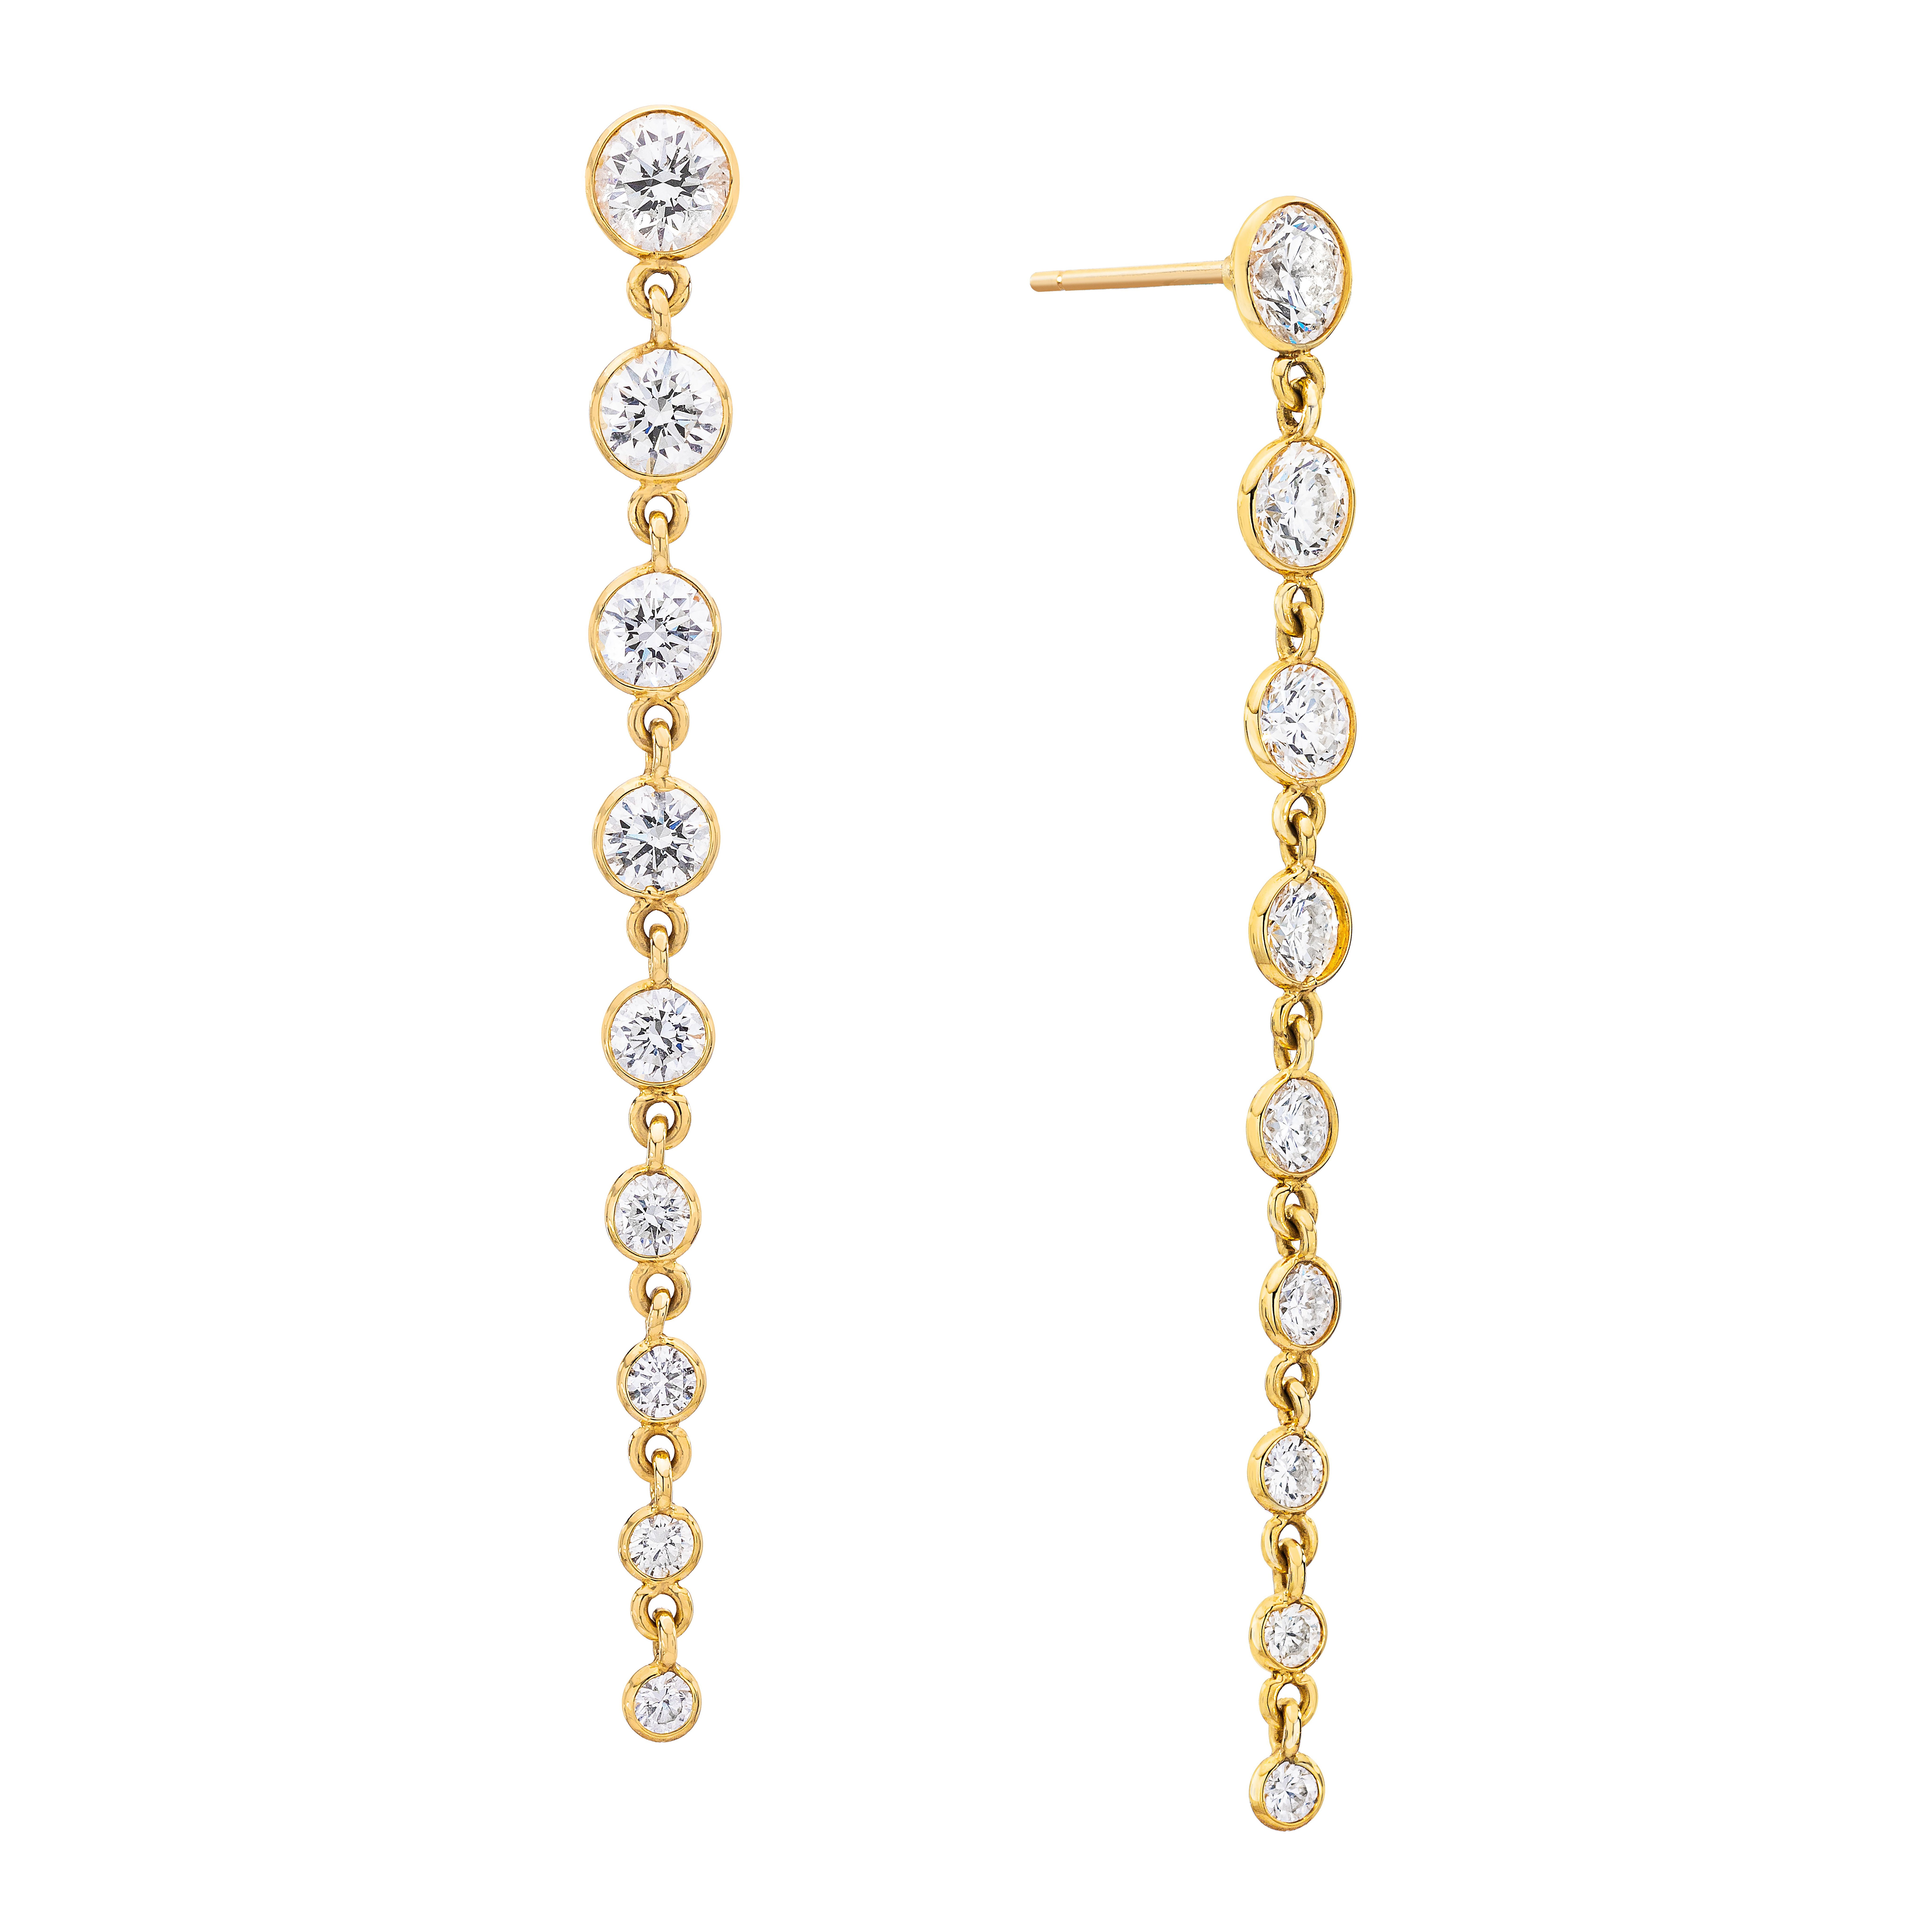 Gorgeous and striking!  Light as a feather on the ear.

Earring Details:

(18) Diamonds Weighing:  3.14 Carats
Overall Weight:  3.2 grams

Handmade in 18 Karat Yellow Gold

Length:  2